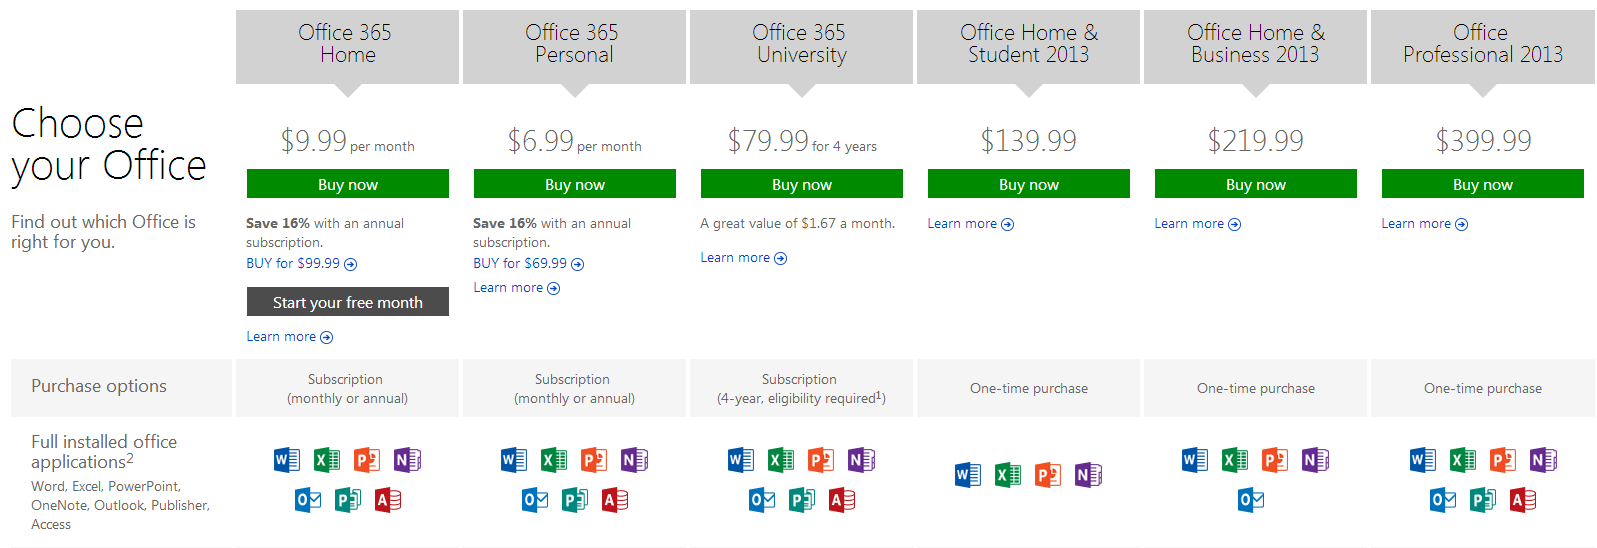 Office Suite Pricing